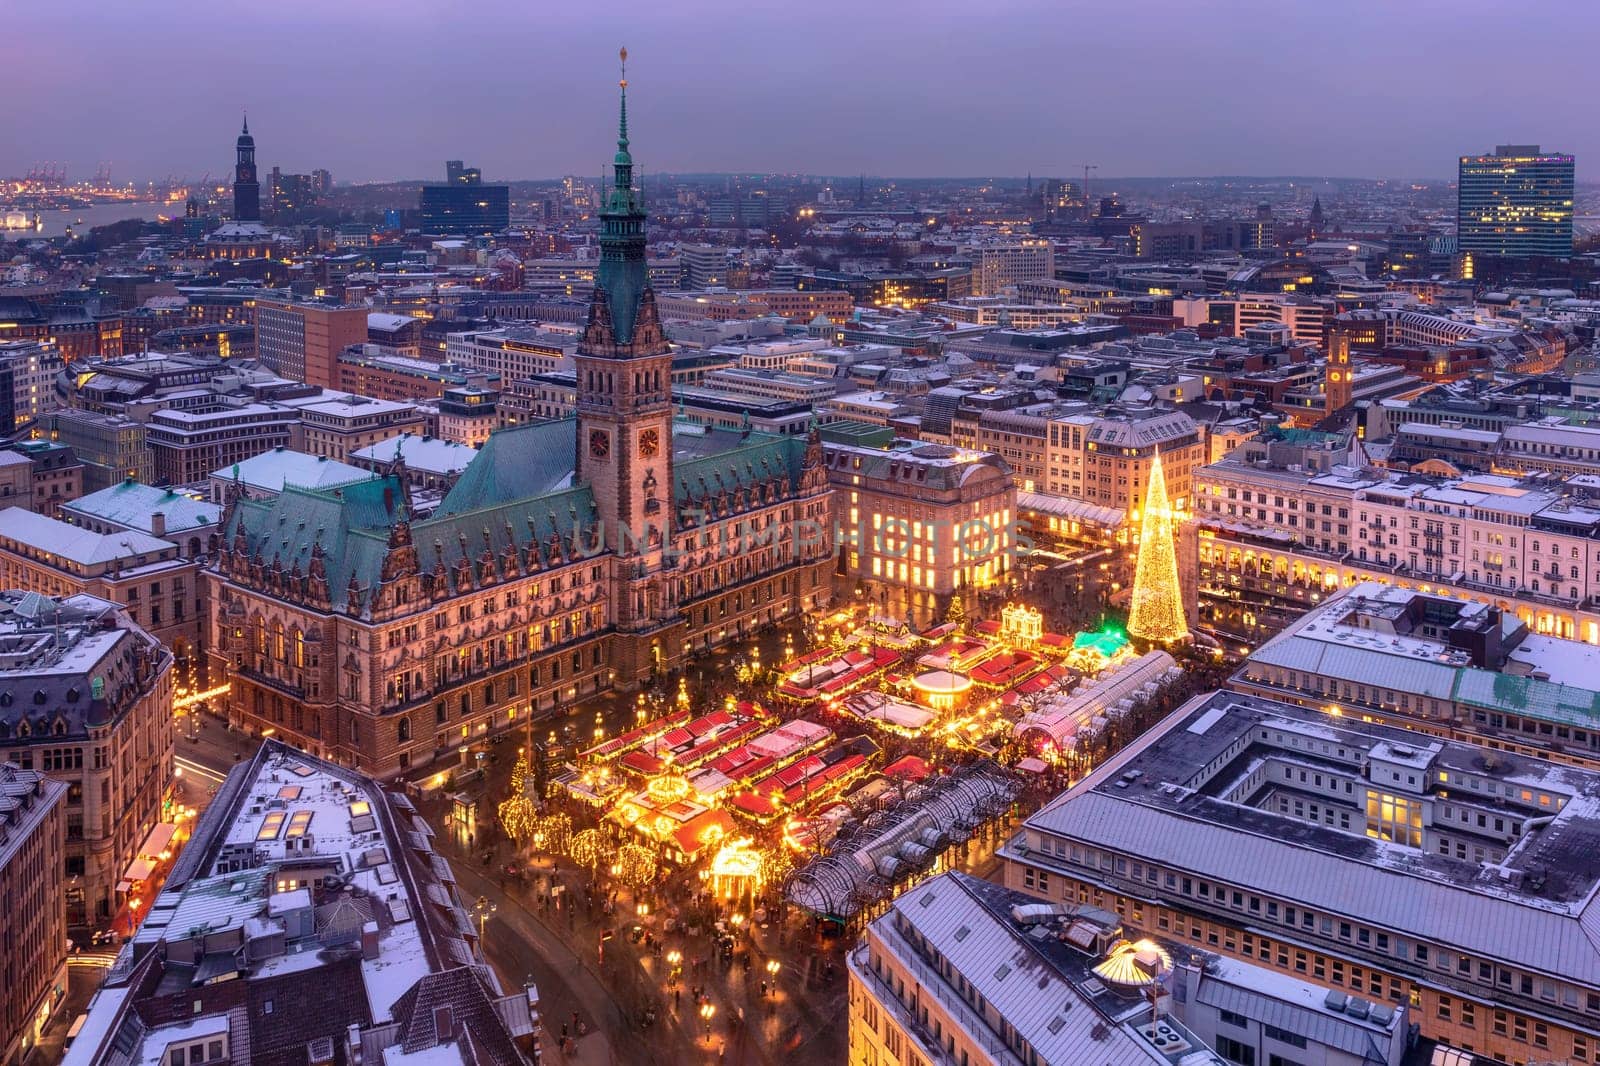 Aerial view of illuminated historic Christmas market on Rathausmarkt in downtown of Hamburg, Germany in the evening.